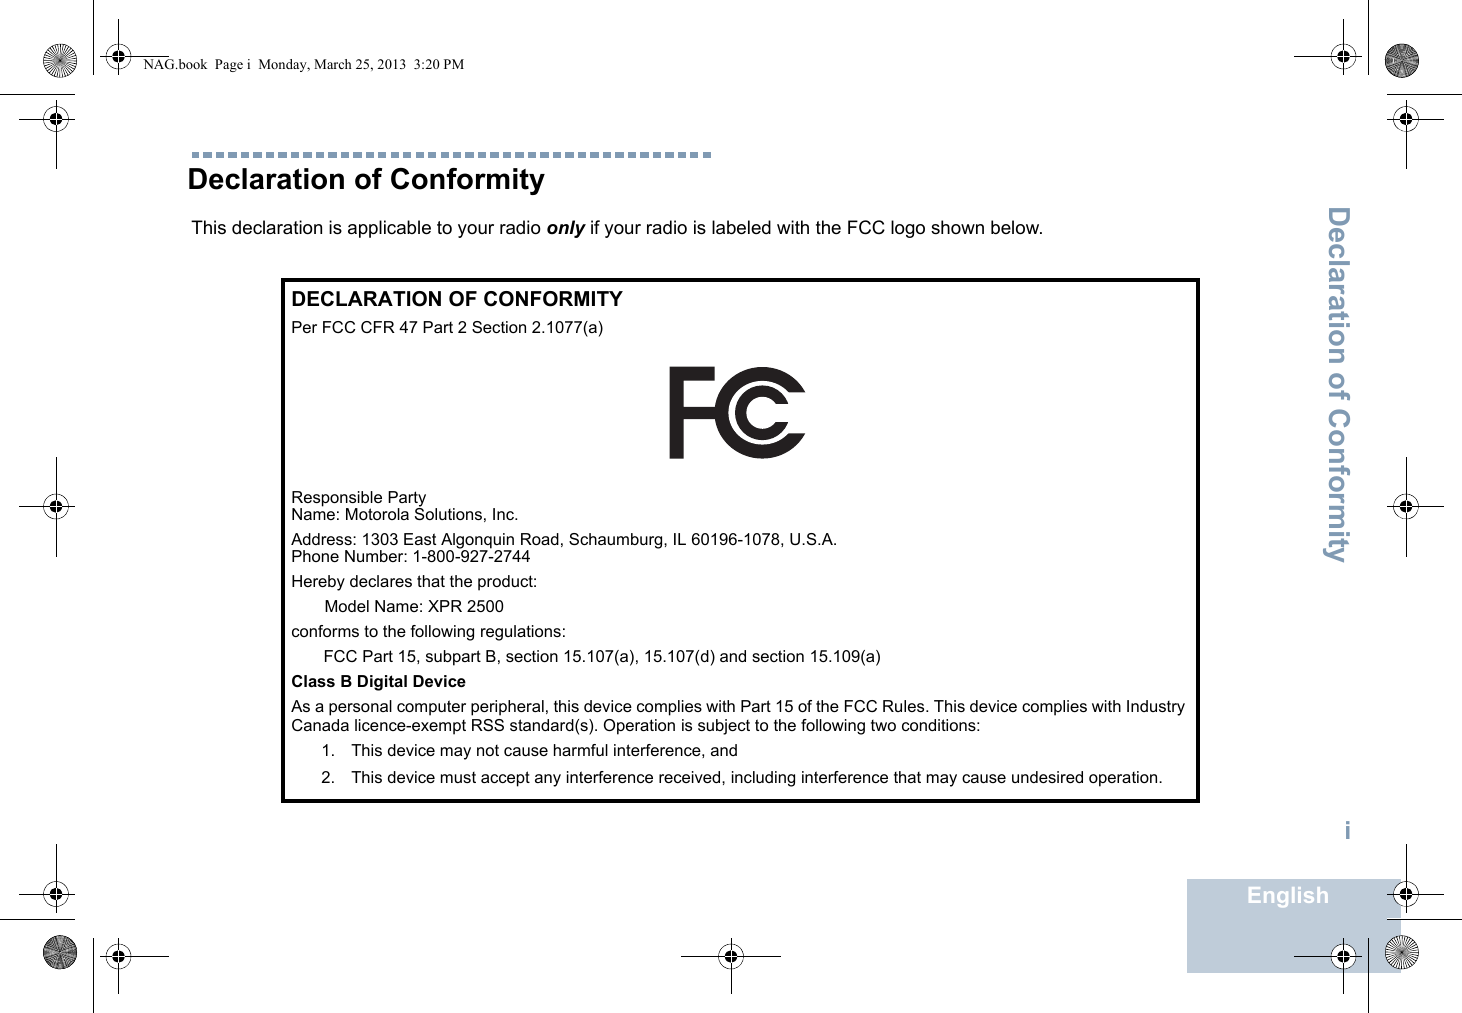 Declaration of ConformityEnglishiDeclaration of ConformityThis declaration is applicable to your radio only if your radio is labeled with the FCC logo shown below.DECLARATION OF CONFORMITYPer FCC CFR 47 Part 2 Section 2.1077(a)Responsible Party Name: Motorola Solutions, Inc.Address: 1303 East Algonquin Road, Schaumburg, IL 60196-1078, U.S.A.Phone Number: 1-800-927-2744Hereby declares that the product:Model Name: XPR 2500conforms to the following regulations:FCC Part 15, subpart B, section 15.107(a), 15.107(d) and section 15.109(a)Class B Digital DeviceAs a personal computer peripheral, this device complies with Part 15 of the FCC Rules. This device complies with Industry Canada licence-exempt RSS standard(s). Operation is subject to the following two conditions:1. This device may not cause harmful interference, and 2. This device must accept any interference received, including interference that may cause undesired operation.NAG.book  Page i  Monday, March 25, 2013  3:20 PM